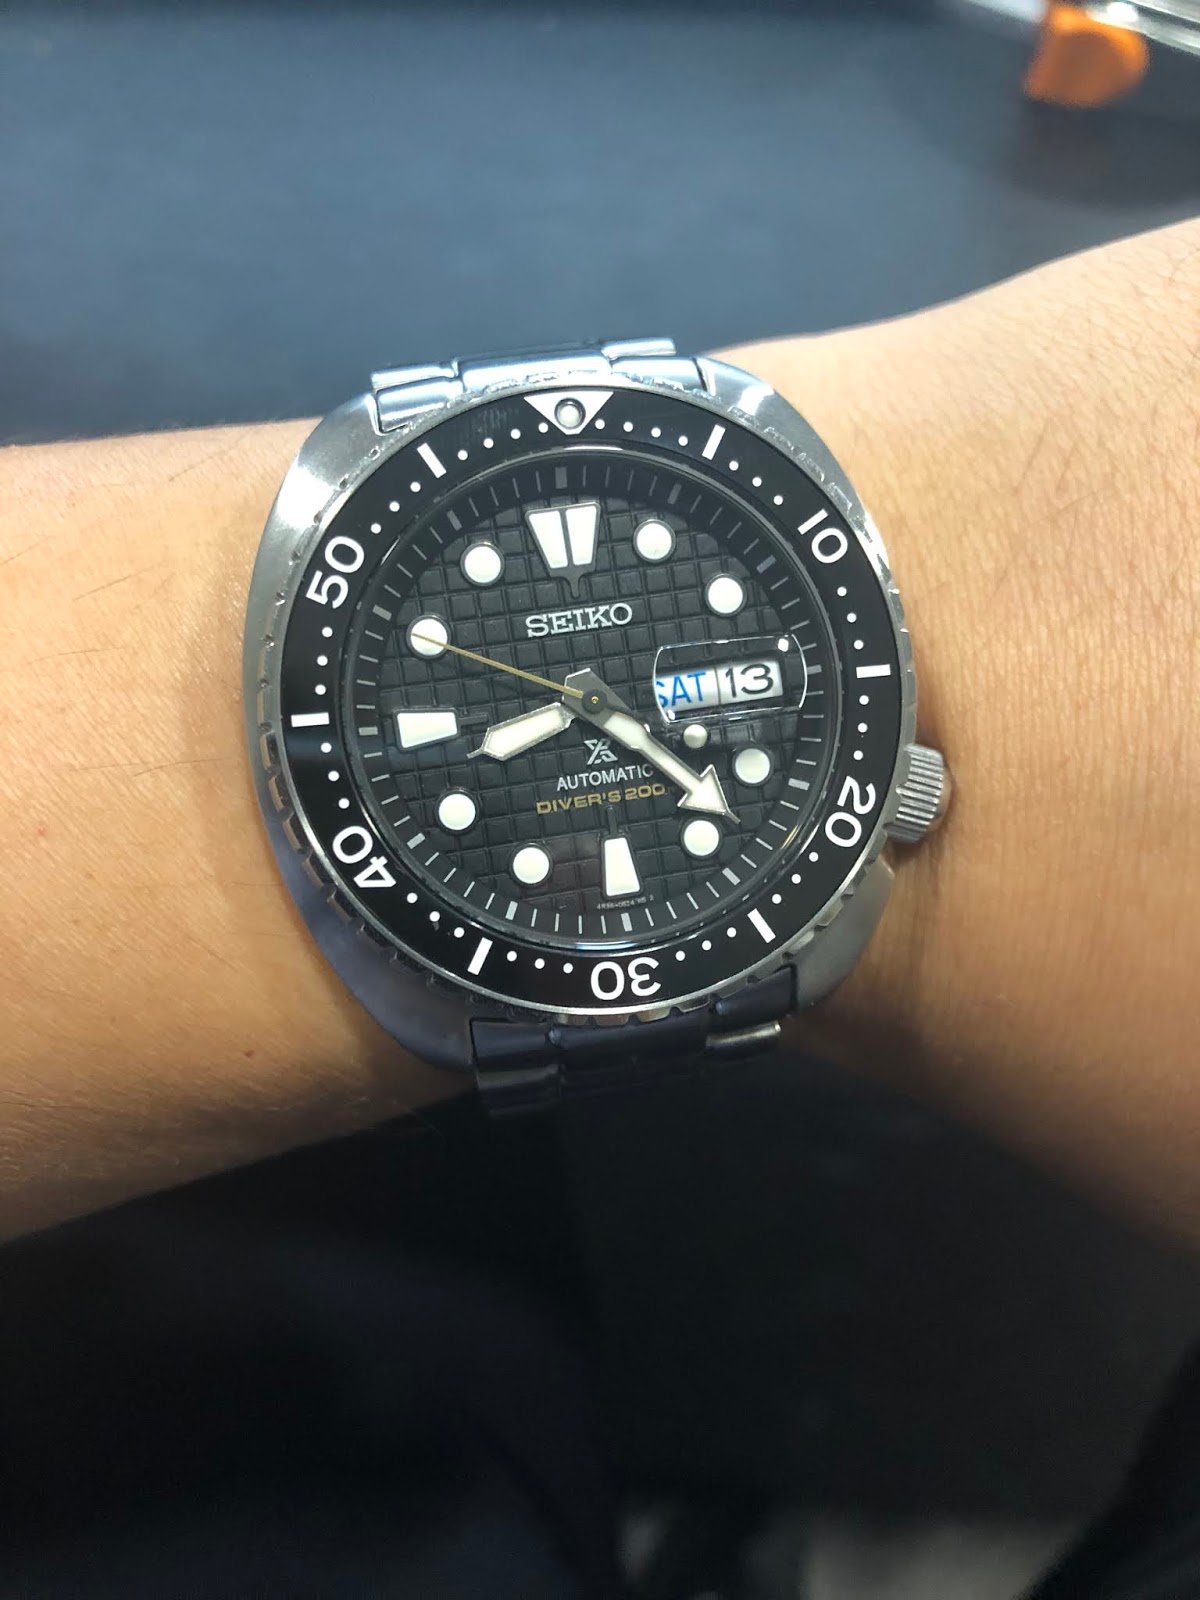 My Eastern Watch Collection: Seiko Prospex King Turtle Diver SRPE03K1  (similar to SRPE05K1 & SRPE07K1) - An Upgrade, A Review (plus Video)